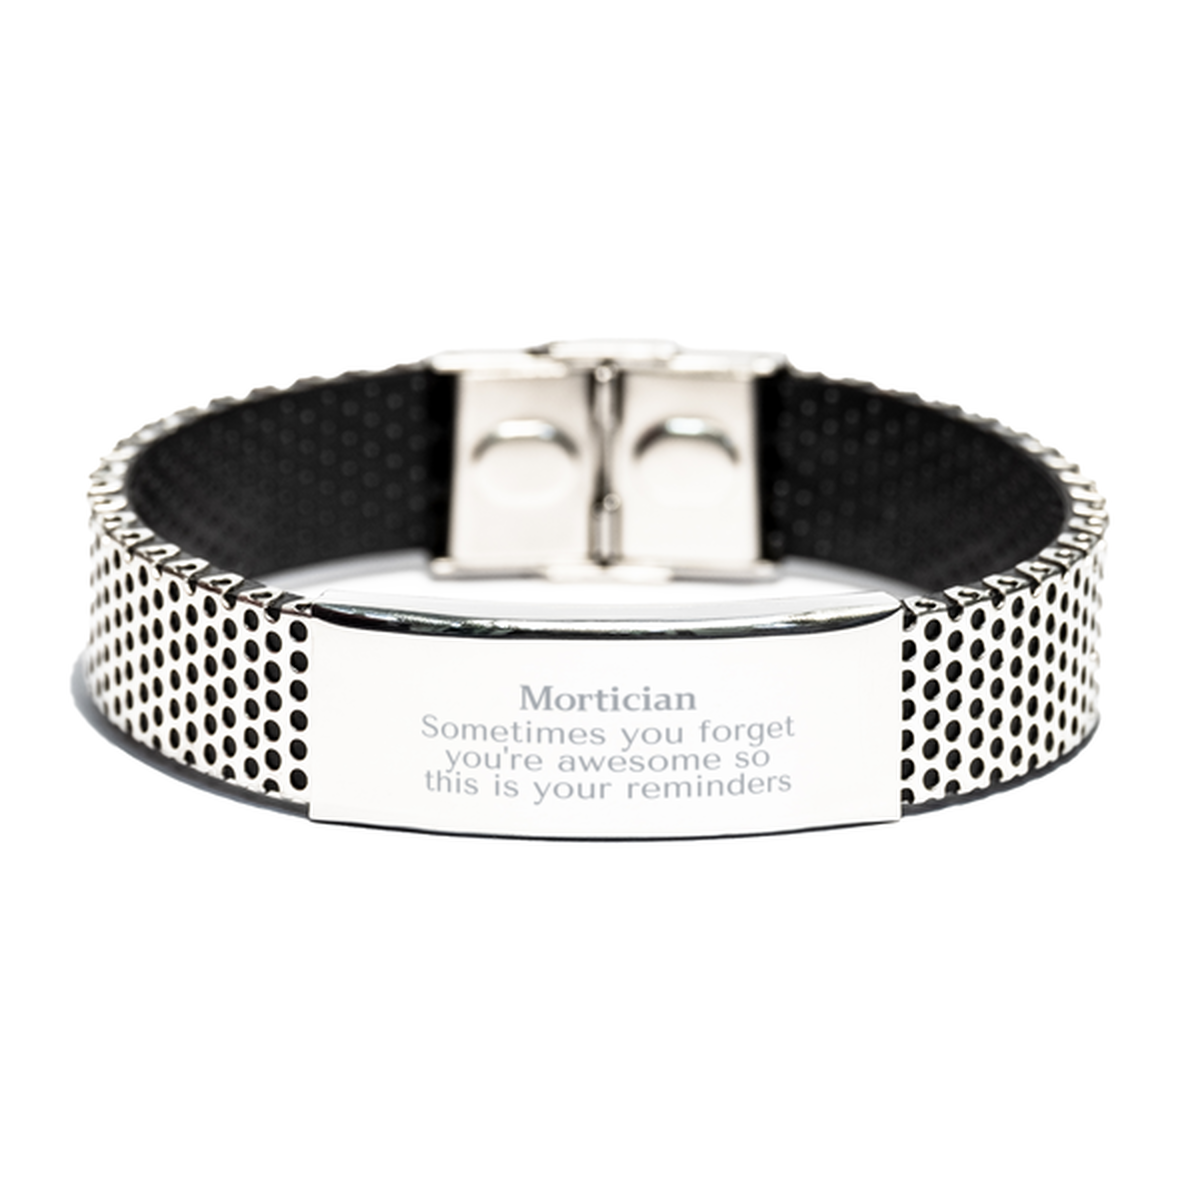 Sentimental Mortician Stainless Steel Bracelet, Mortician Sometimes you forget you're awesome so this is your reminders, Graduation Christmas Birthday Gifts for Mortician, Men, Women, Coworkers